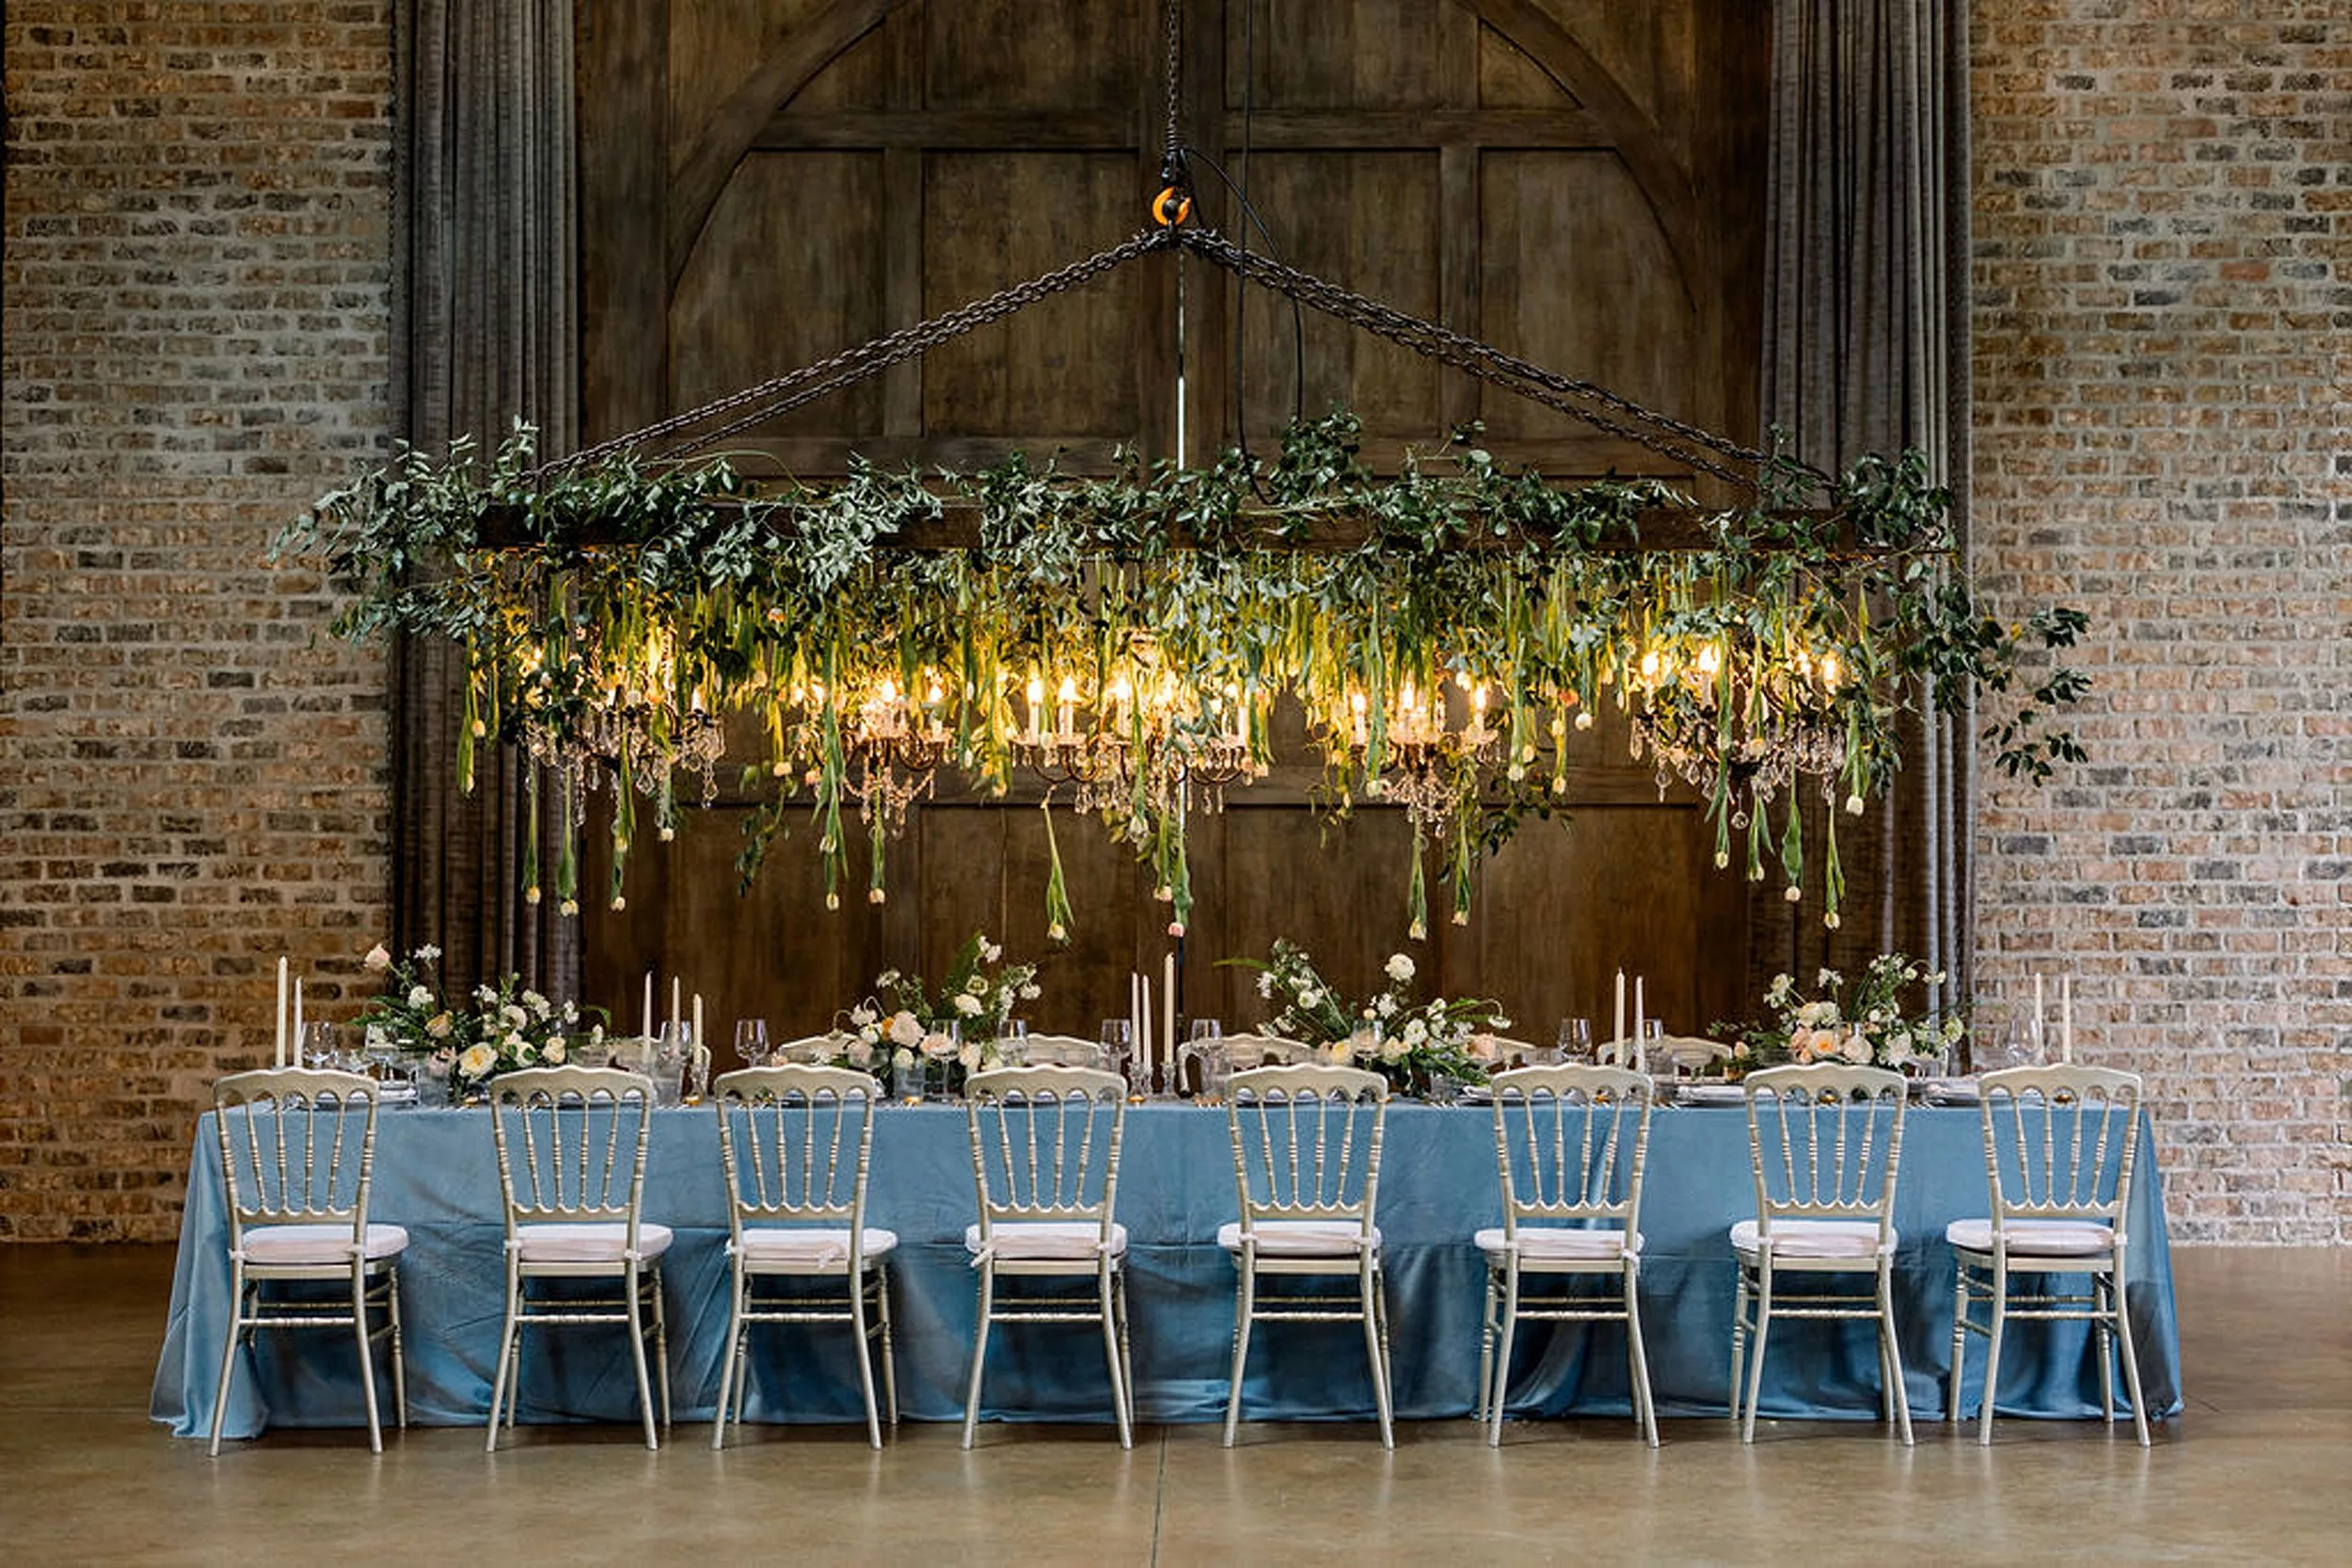 Details of a blue wedding reception table with silver chairs in front of a large wooden door under a large chandelier dressed with hanging tulips and chandeliers